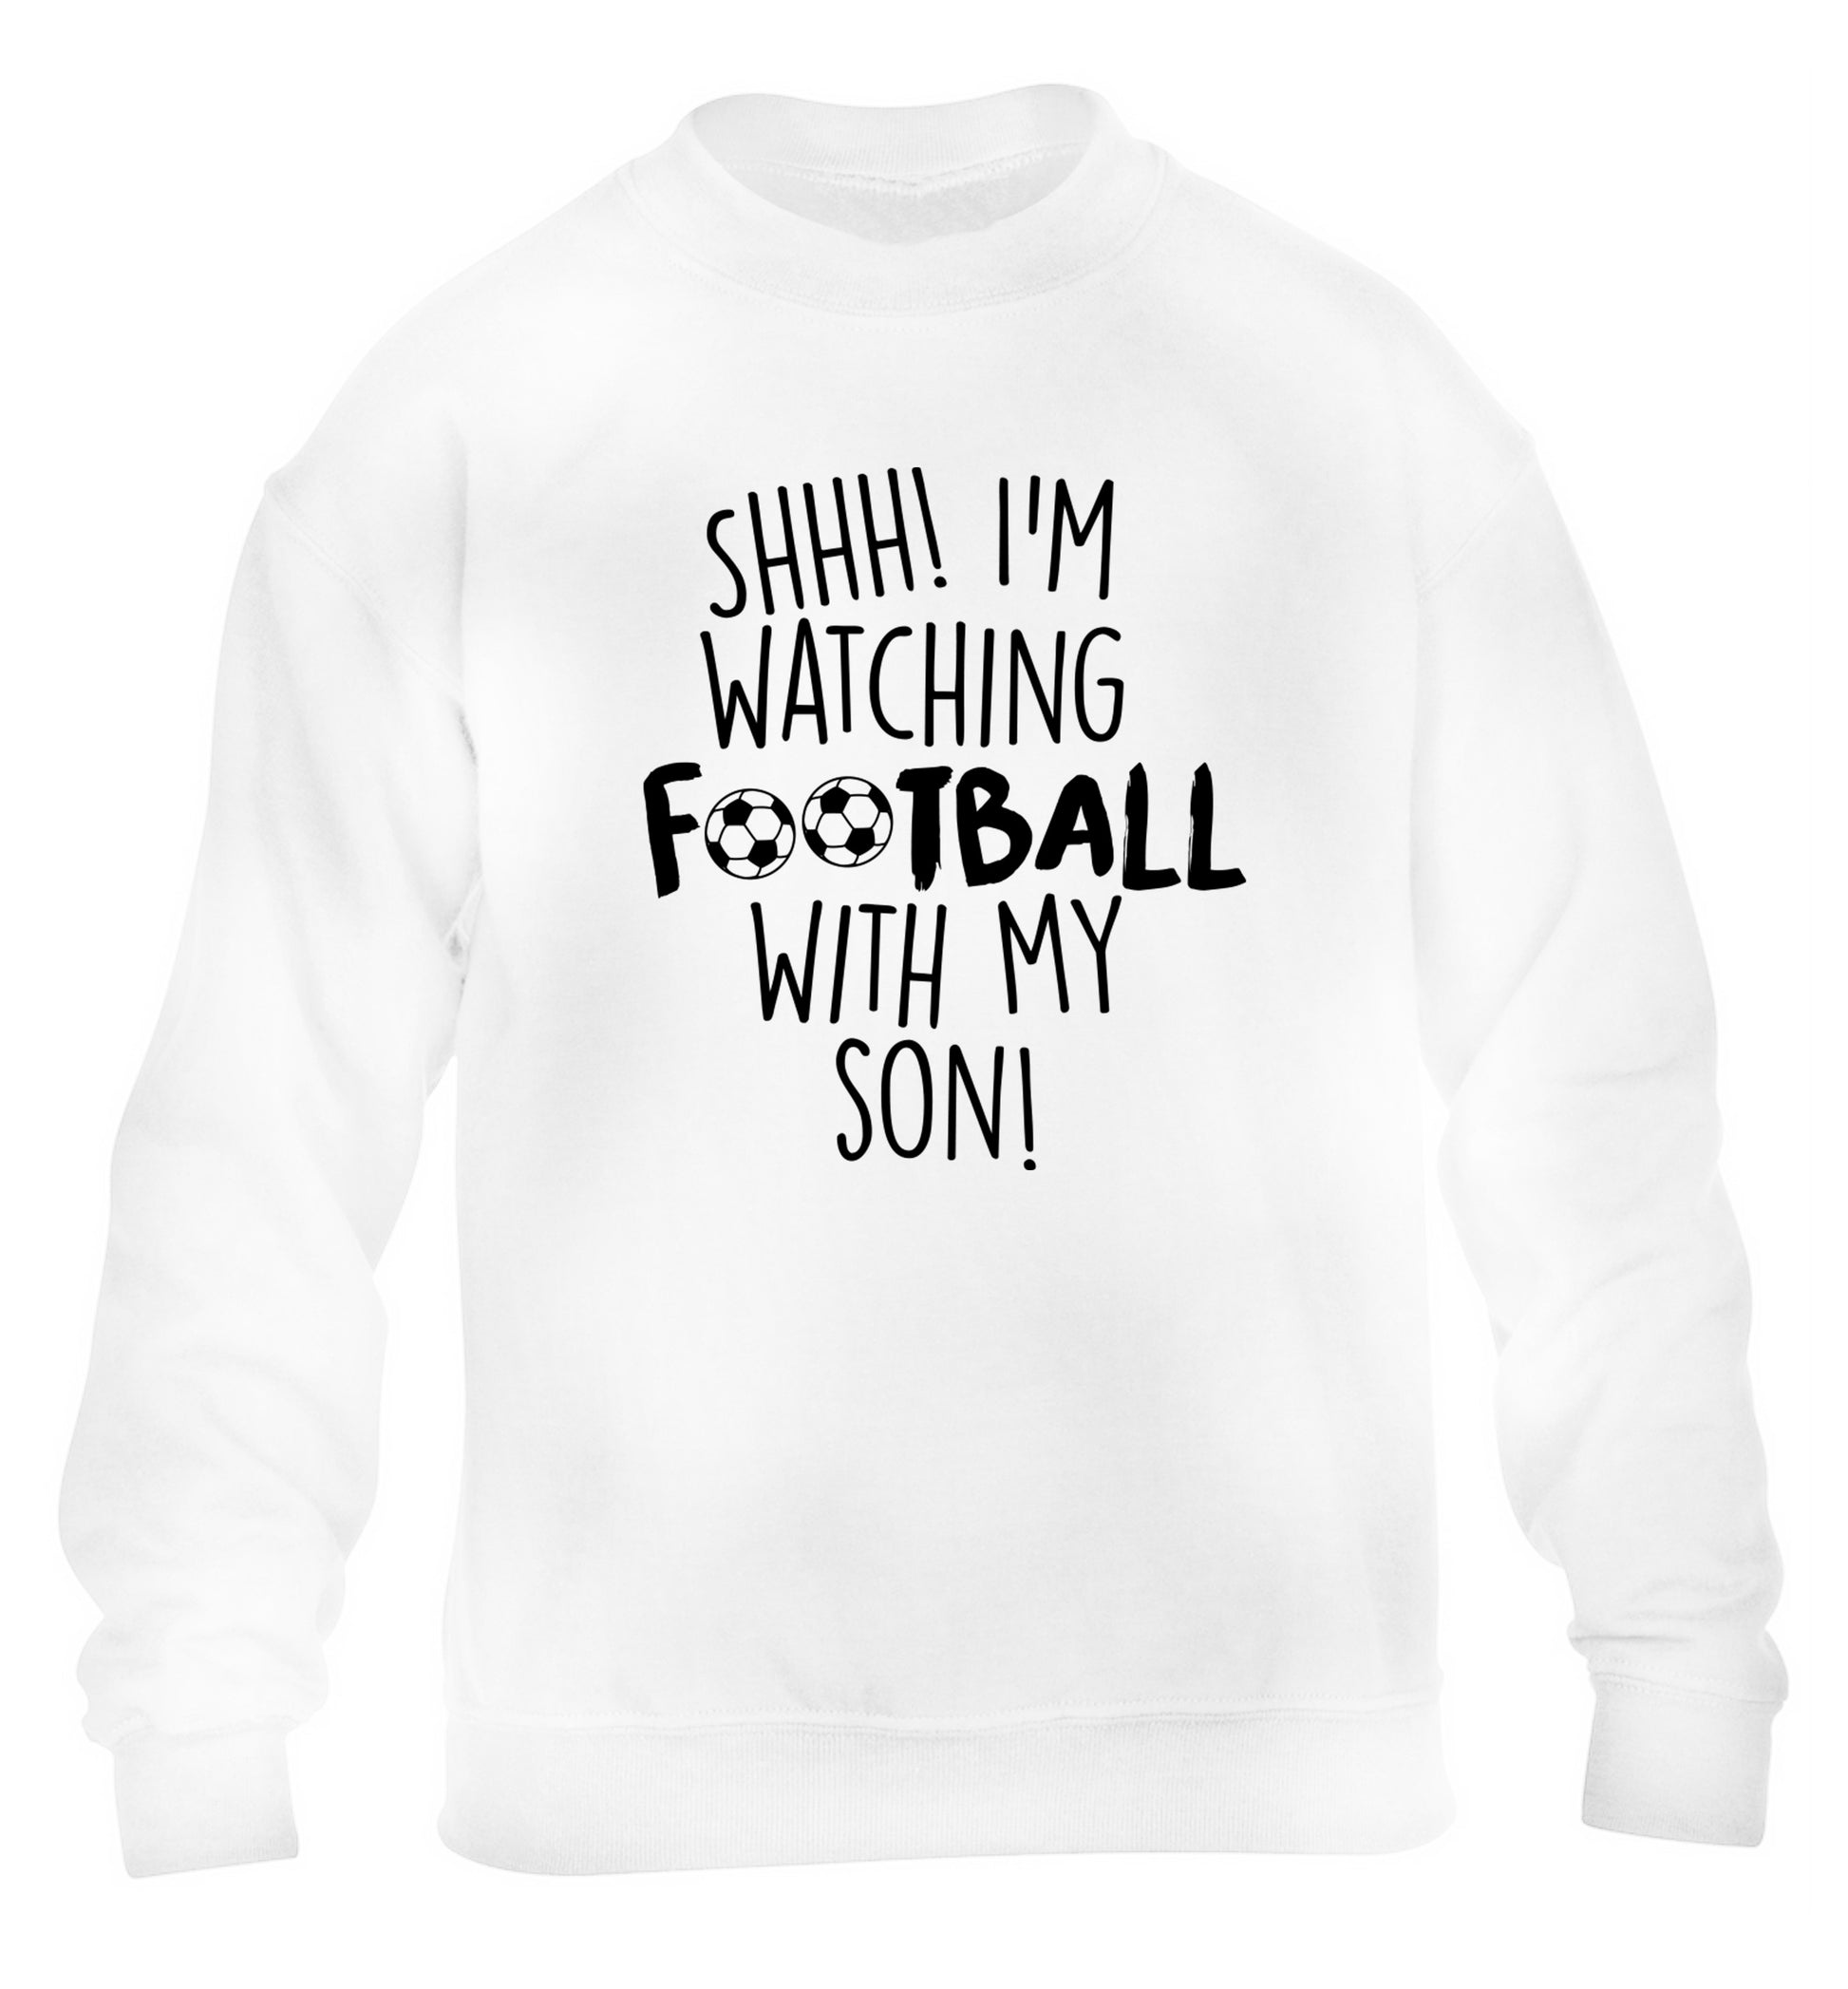 Shhh I'm watching football with my son children's white sweater 12-14 Years